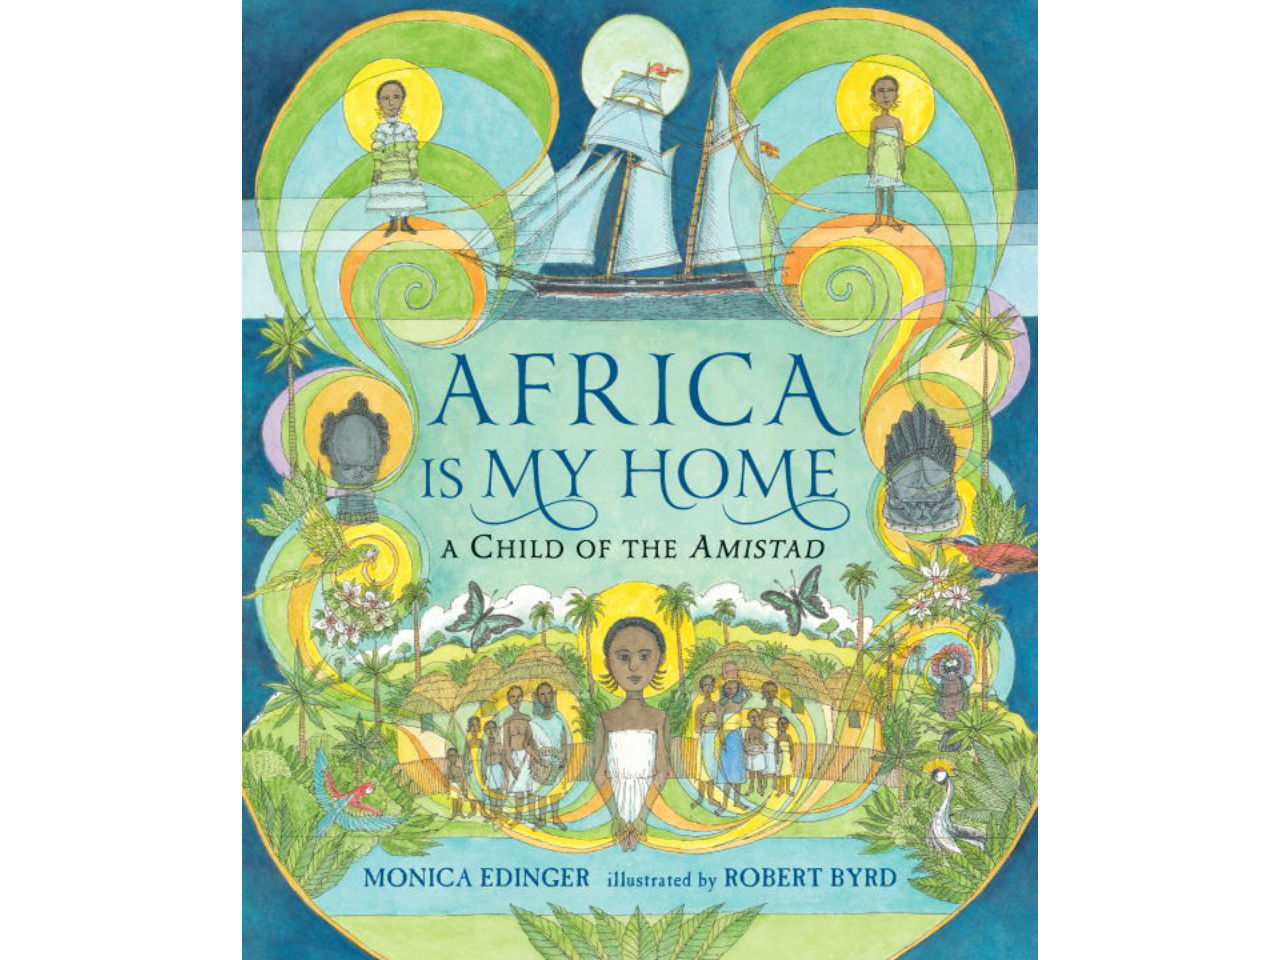 Africa is my Home: A Child of the Amistad